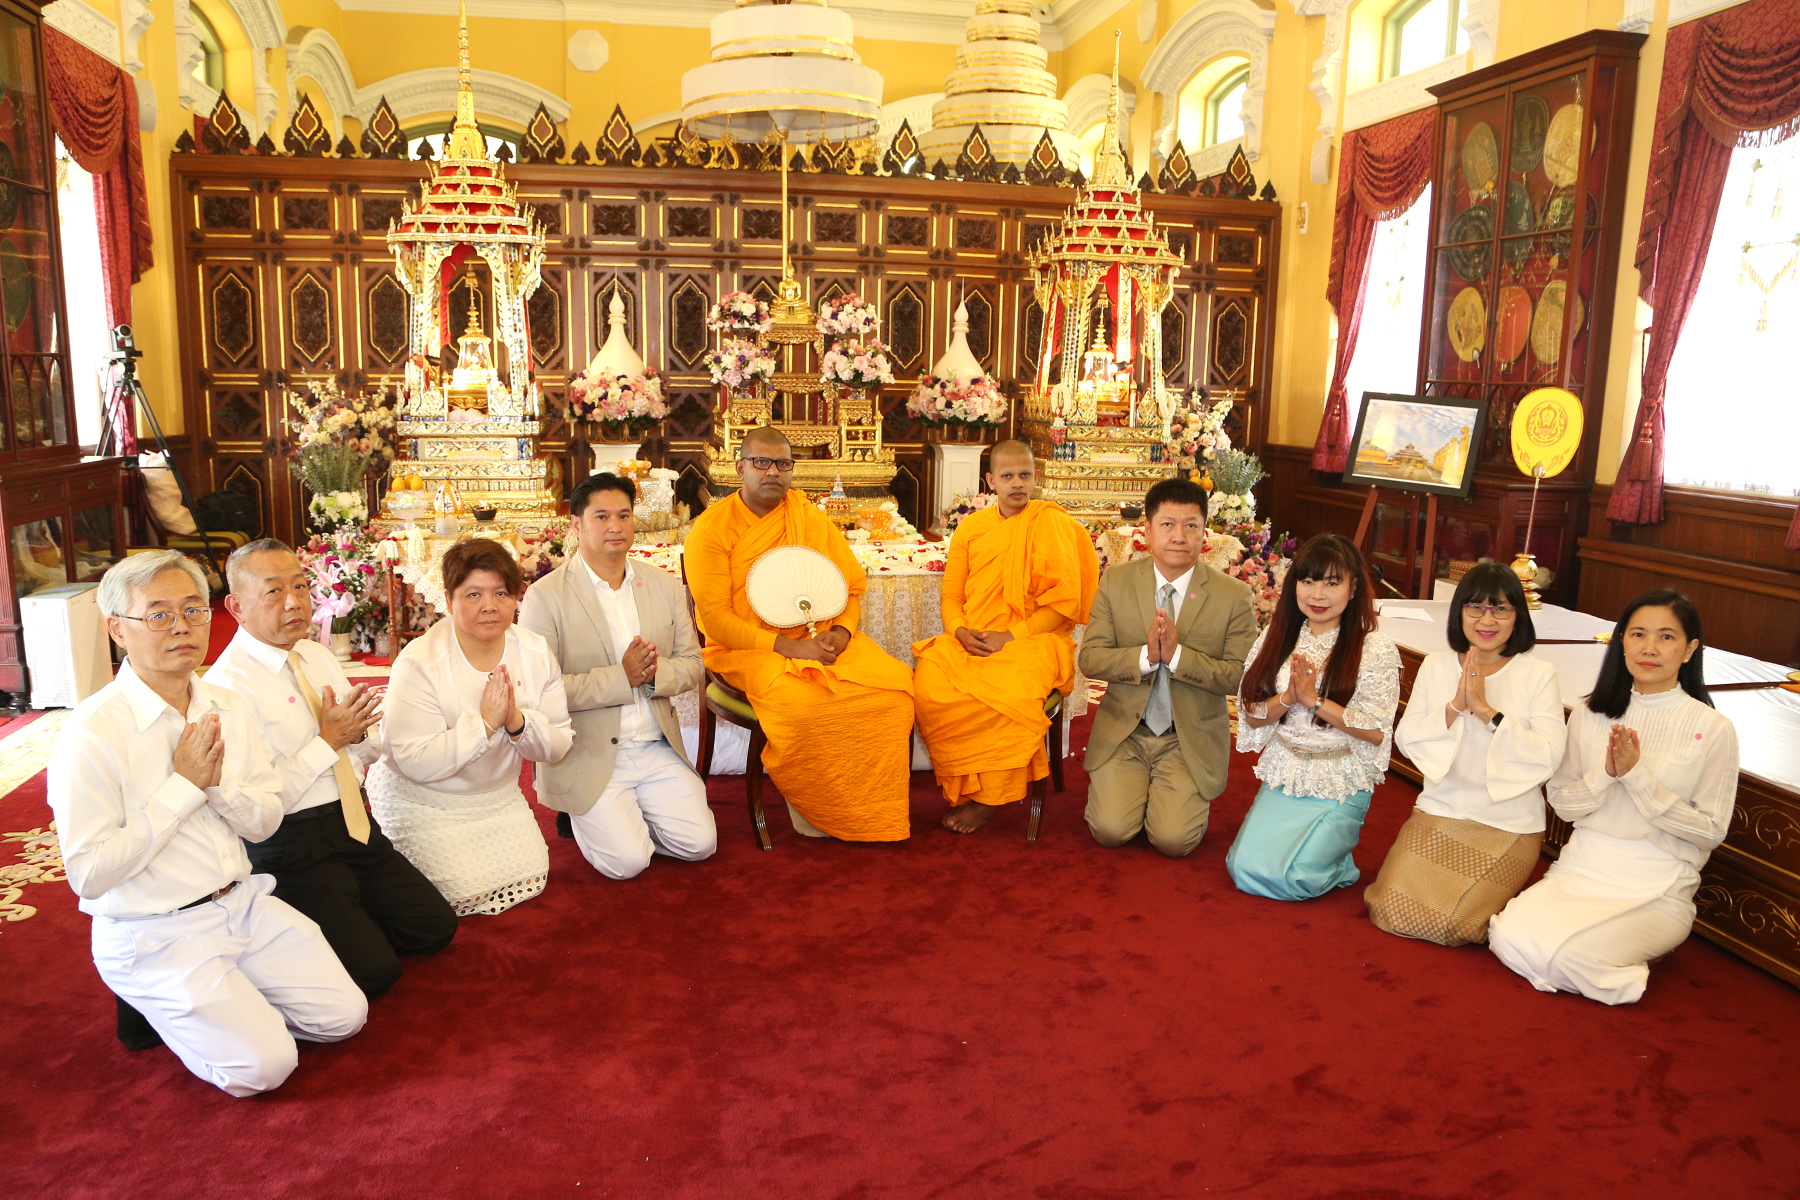 EXIM Thailand Co-hosts Ceremony to Pay Homage to the Hair Relics of the Lord Buddha from Sri Lanka on the Occasion of the King’s Coronation